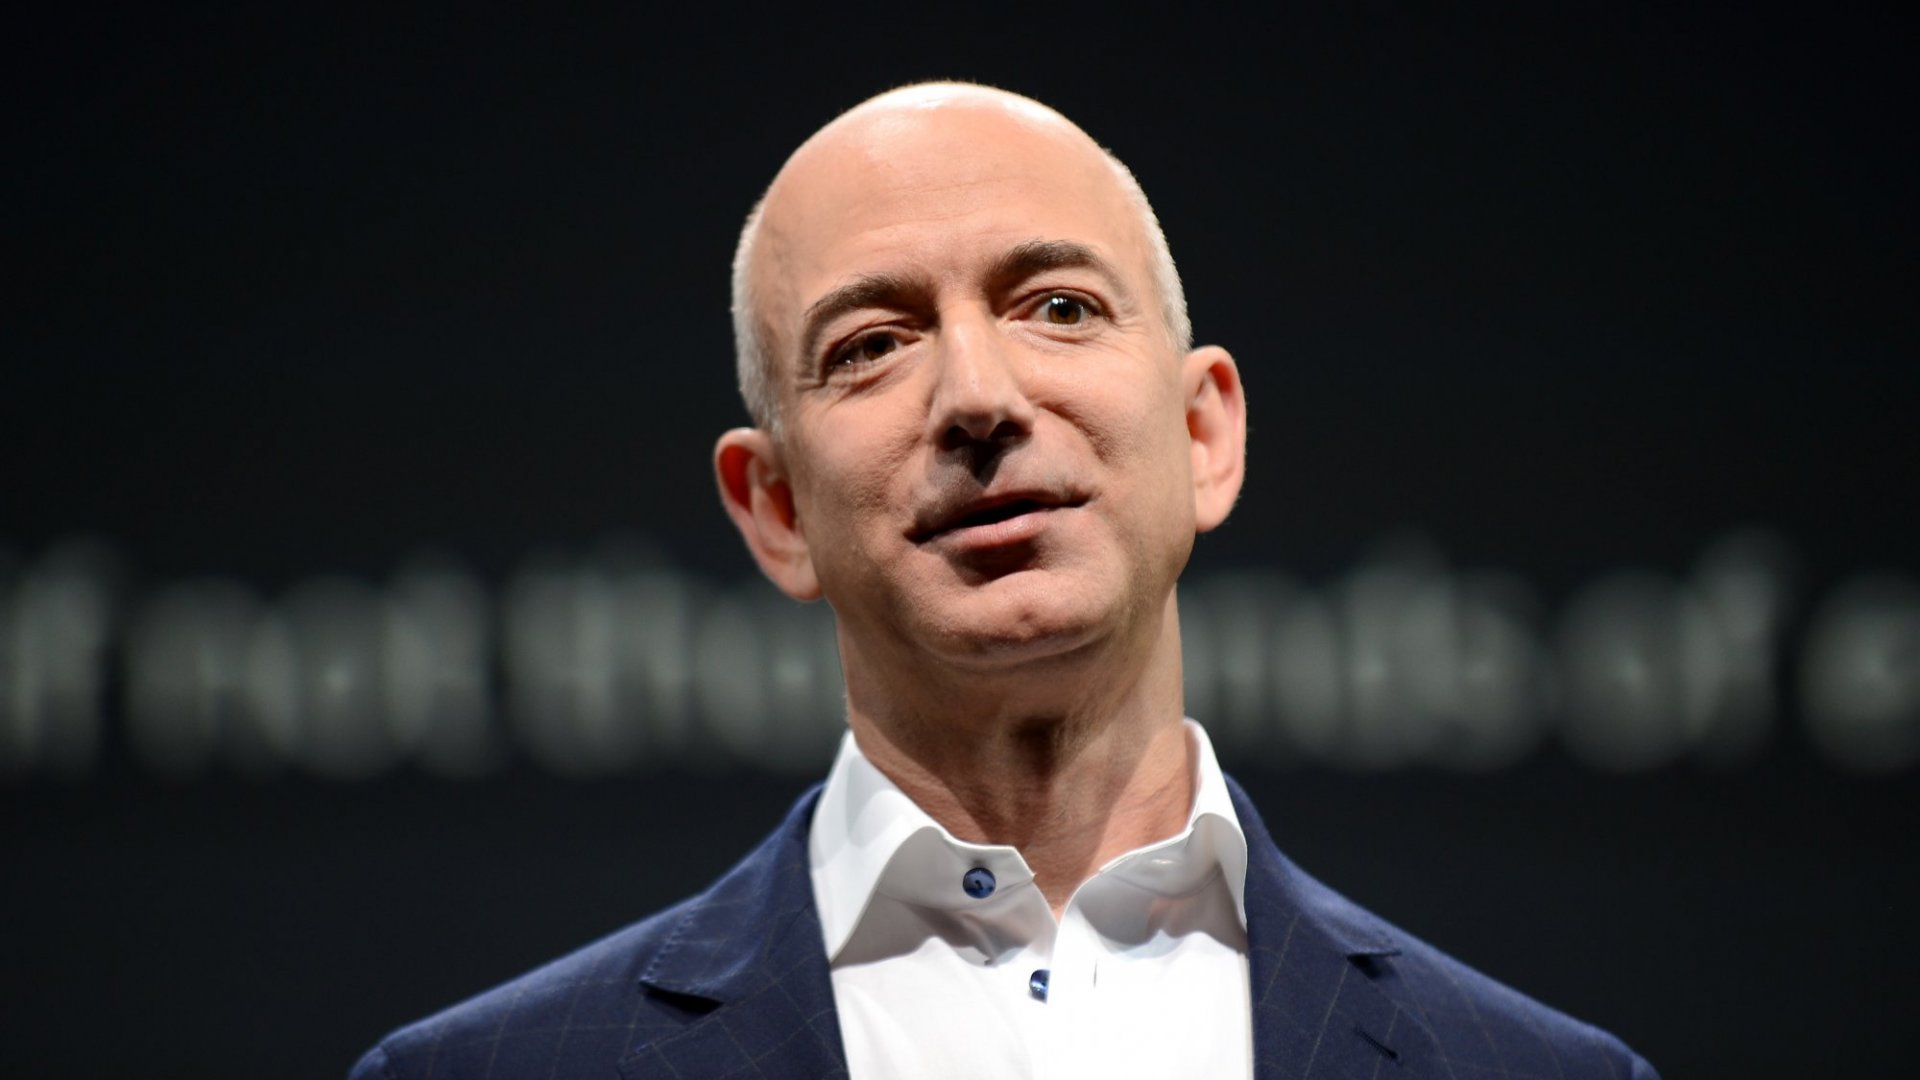 Jeff bezos responds to criticism of amazons working conditions